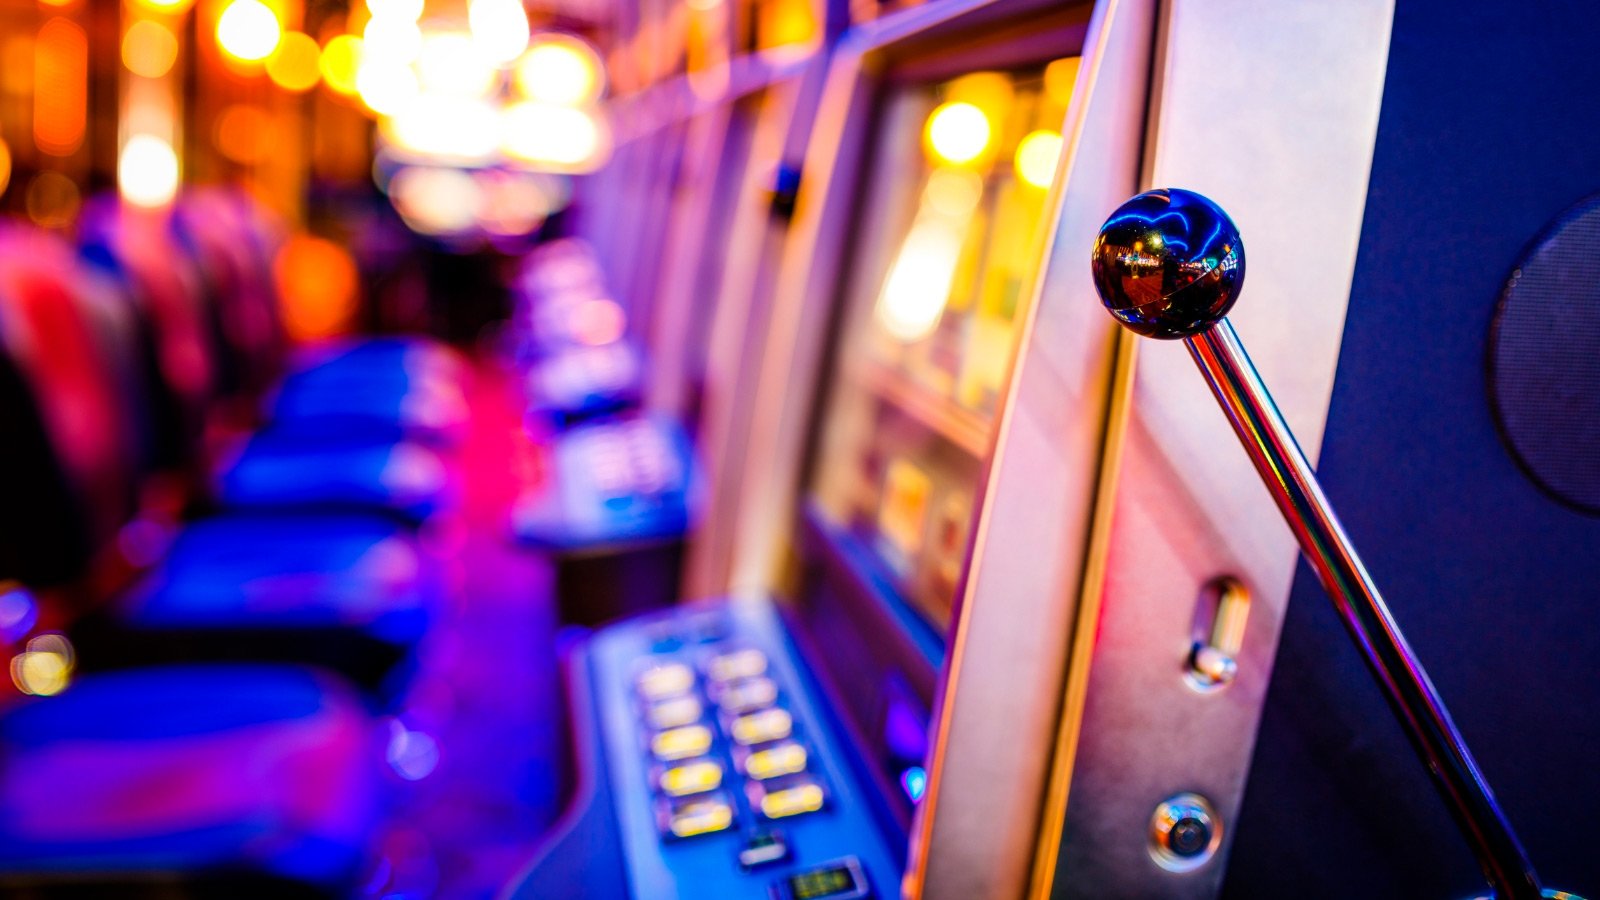 Romania lawmakers pass gambling venues ban in small towns and villages | Yogonet International